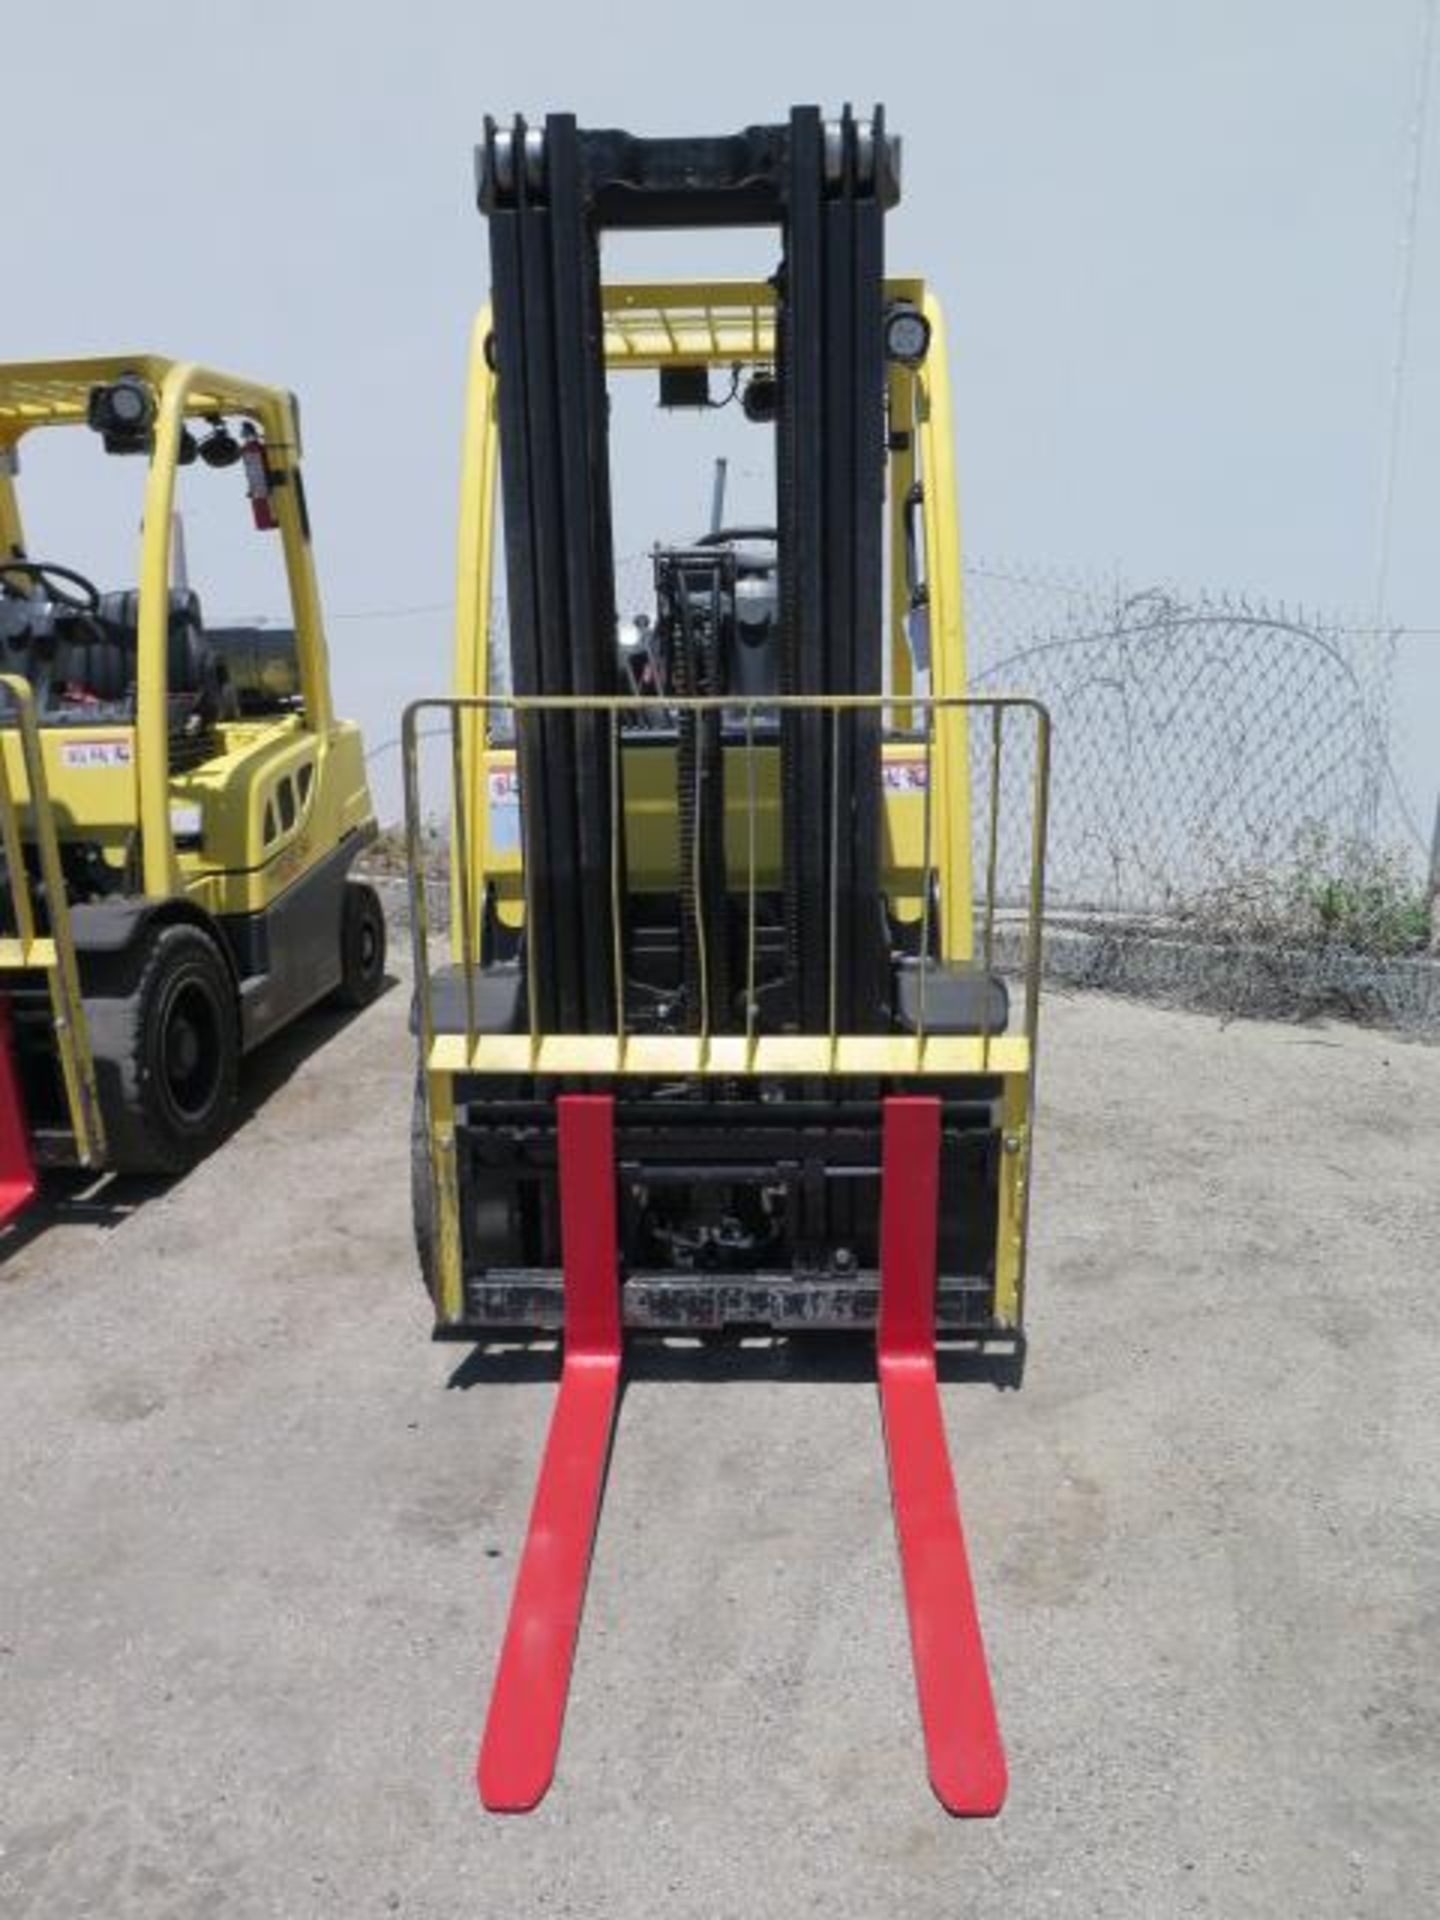 2017 Hyster H50FT 5000 Lb LPG Forklift s/n P177V06250 w/ 3-Stage,189” Lift, Side Shift, SOLD AS IS - Image 2 of 22